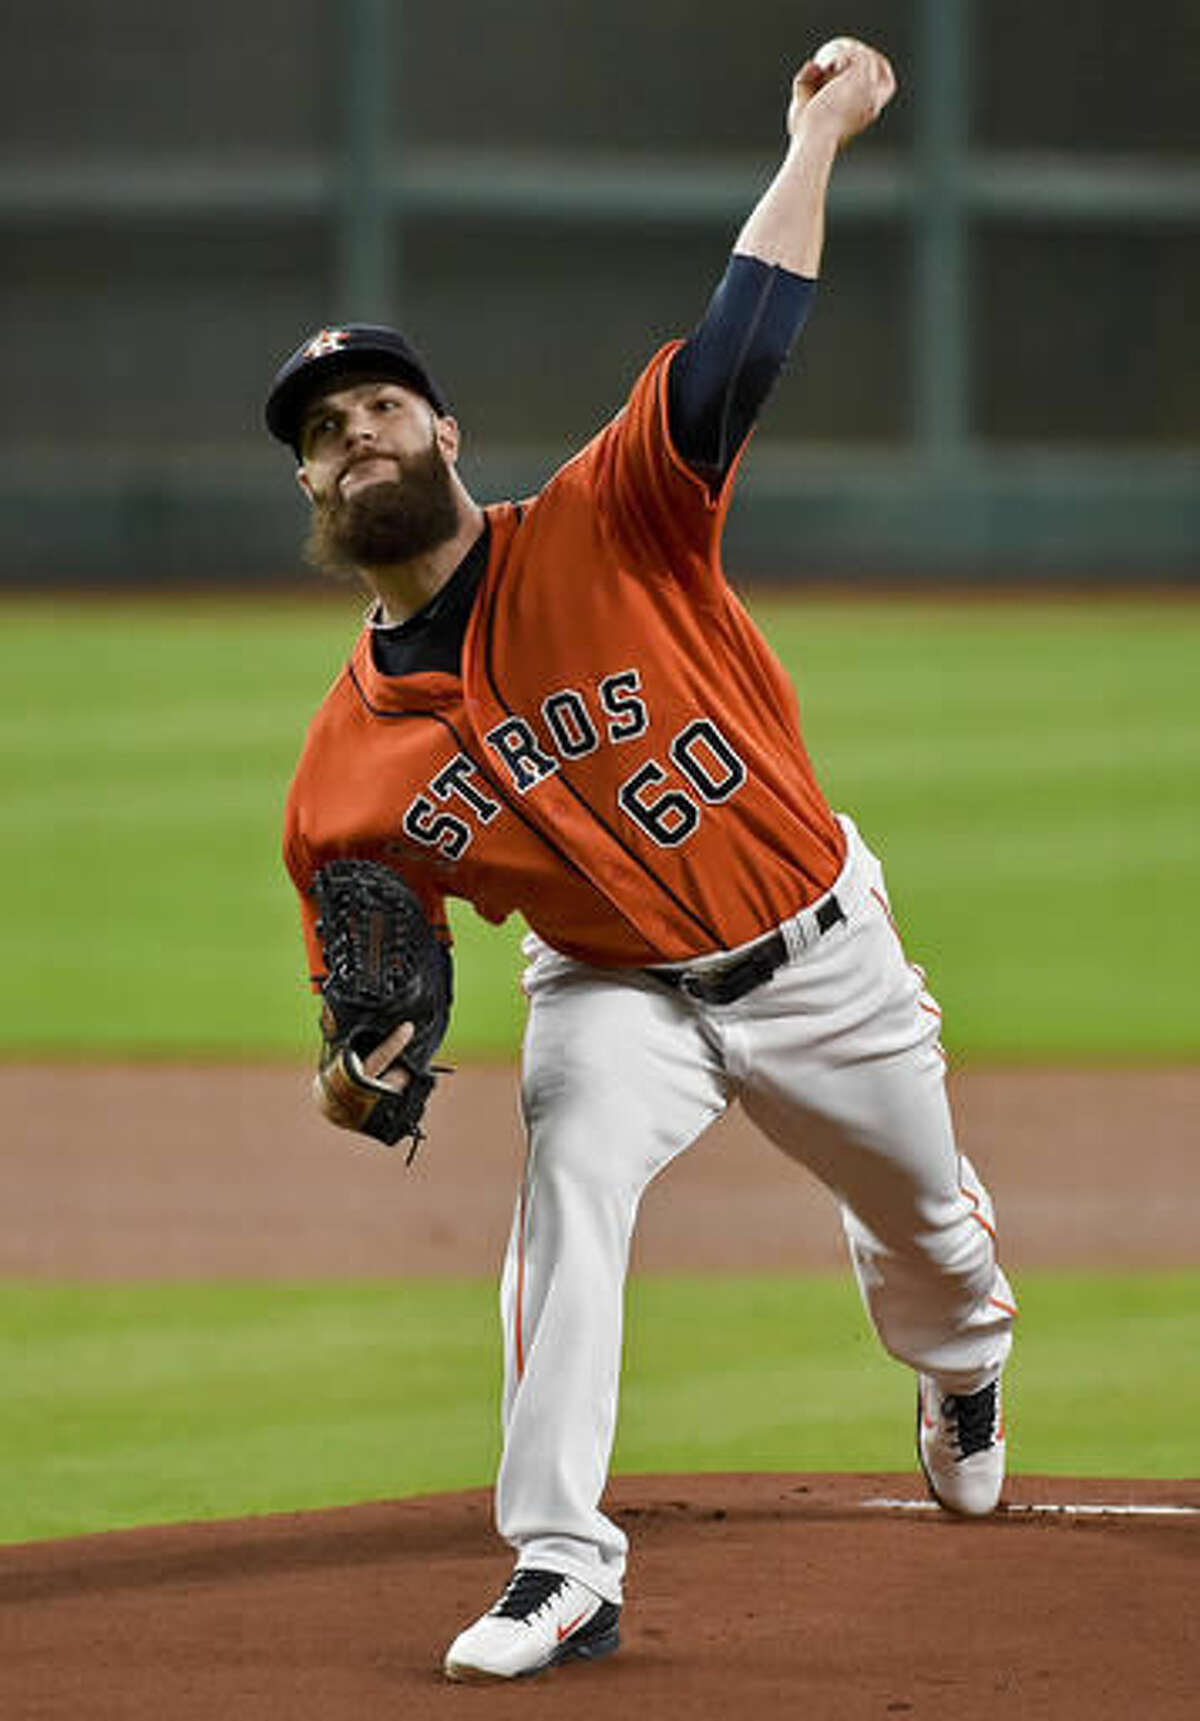 Houston Astros starting pitcher Dallas Keuchel delivers in the first inning of a baseball game against the Texas Rangers, Friday, Aug. 5, 2016, in Houston. (AP Photo/Eric Christian Smith)